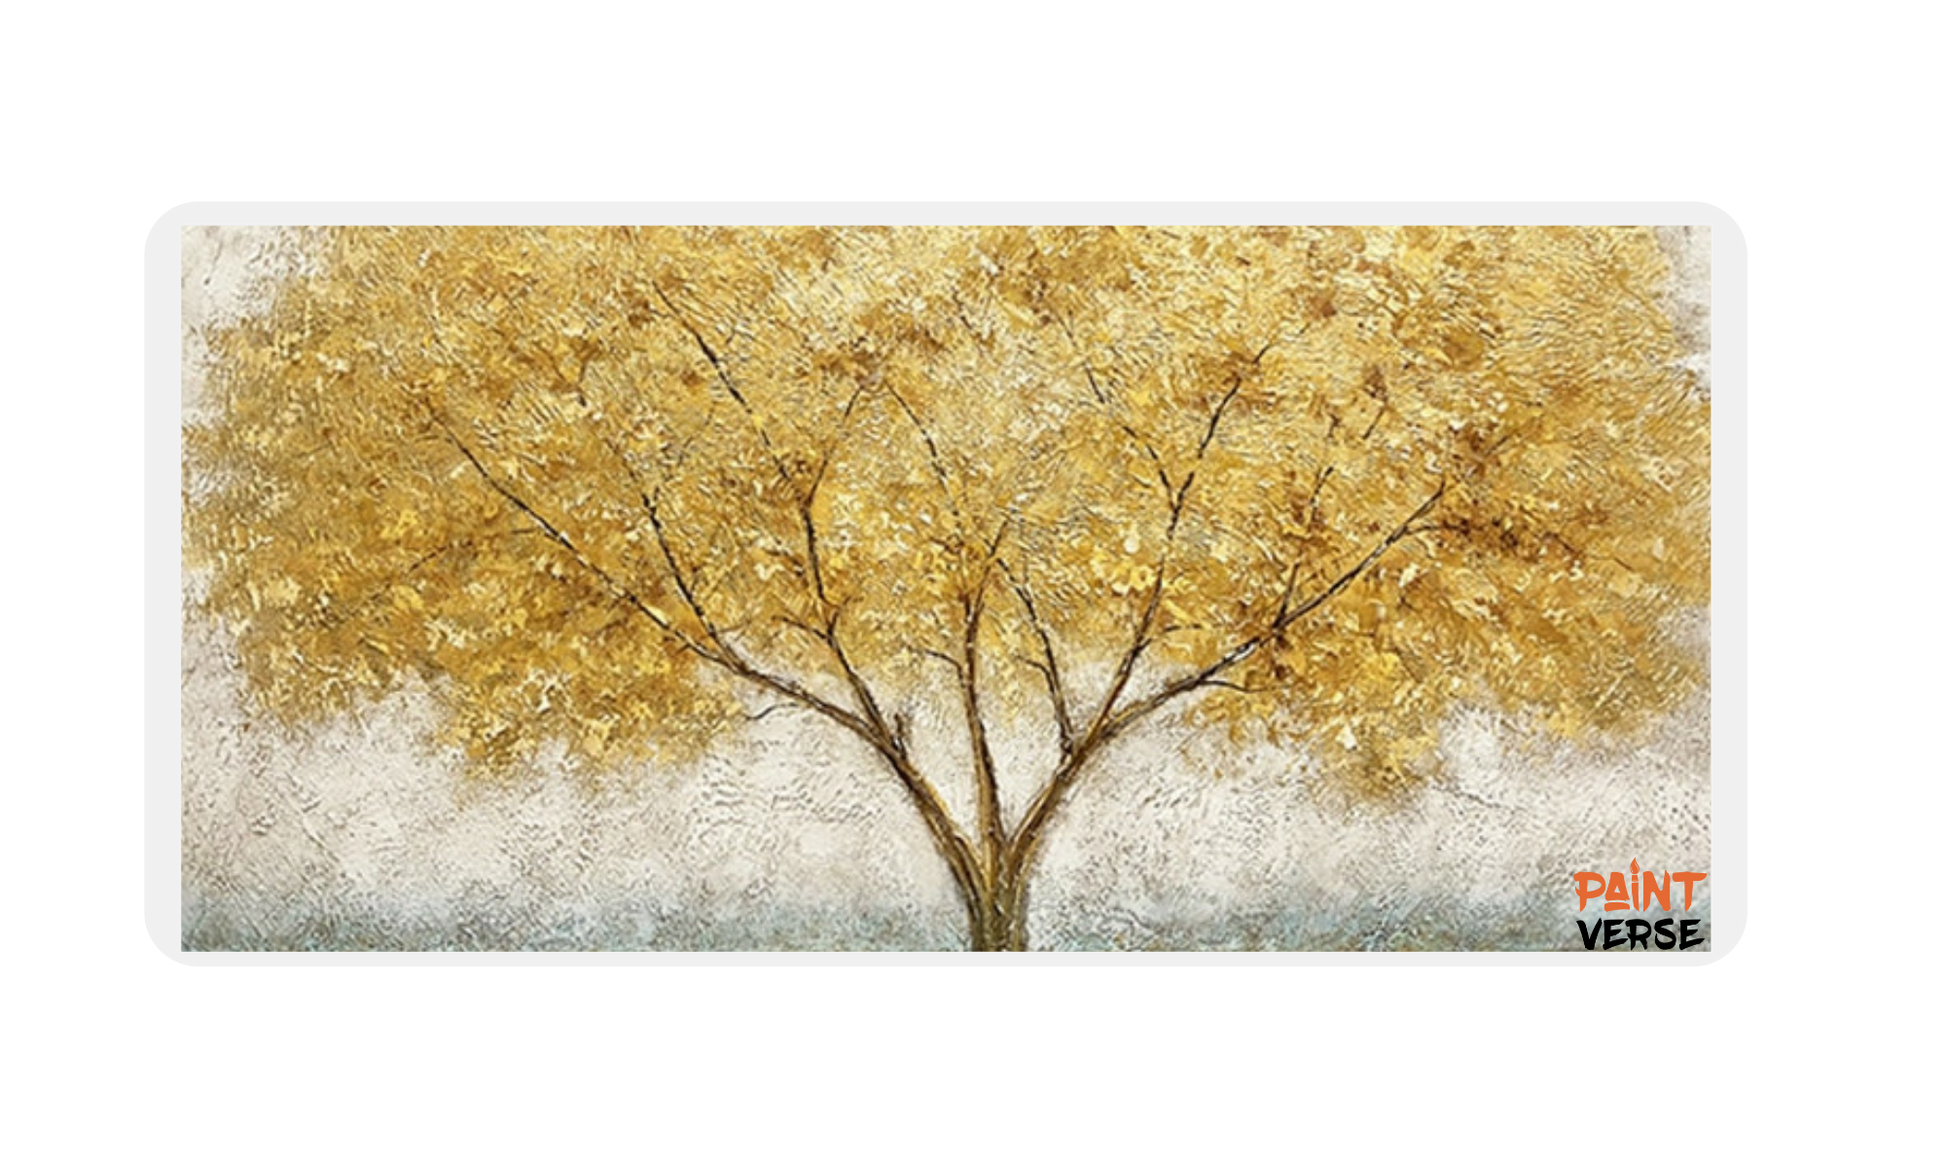 100% Hand-Painted Forest Oil Painting Golden Tree Wall Poster Decor